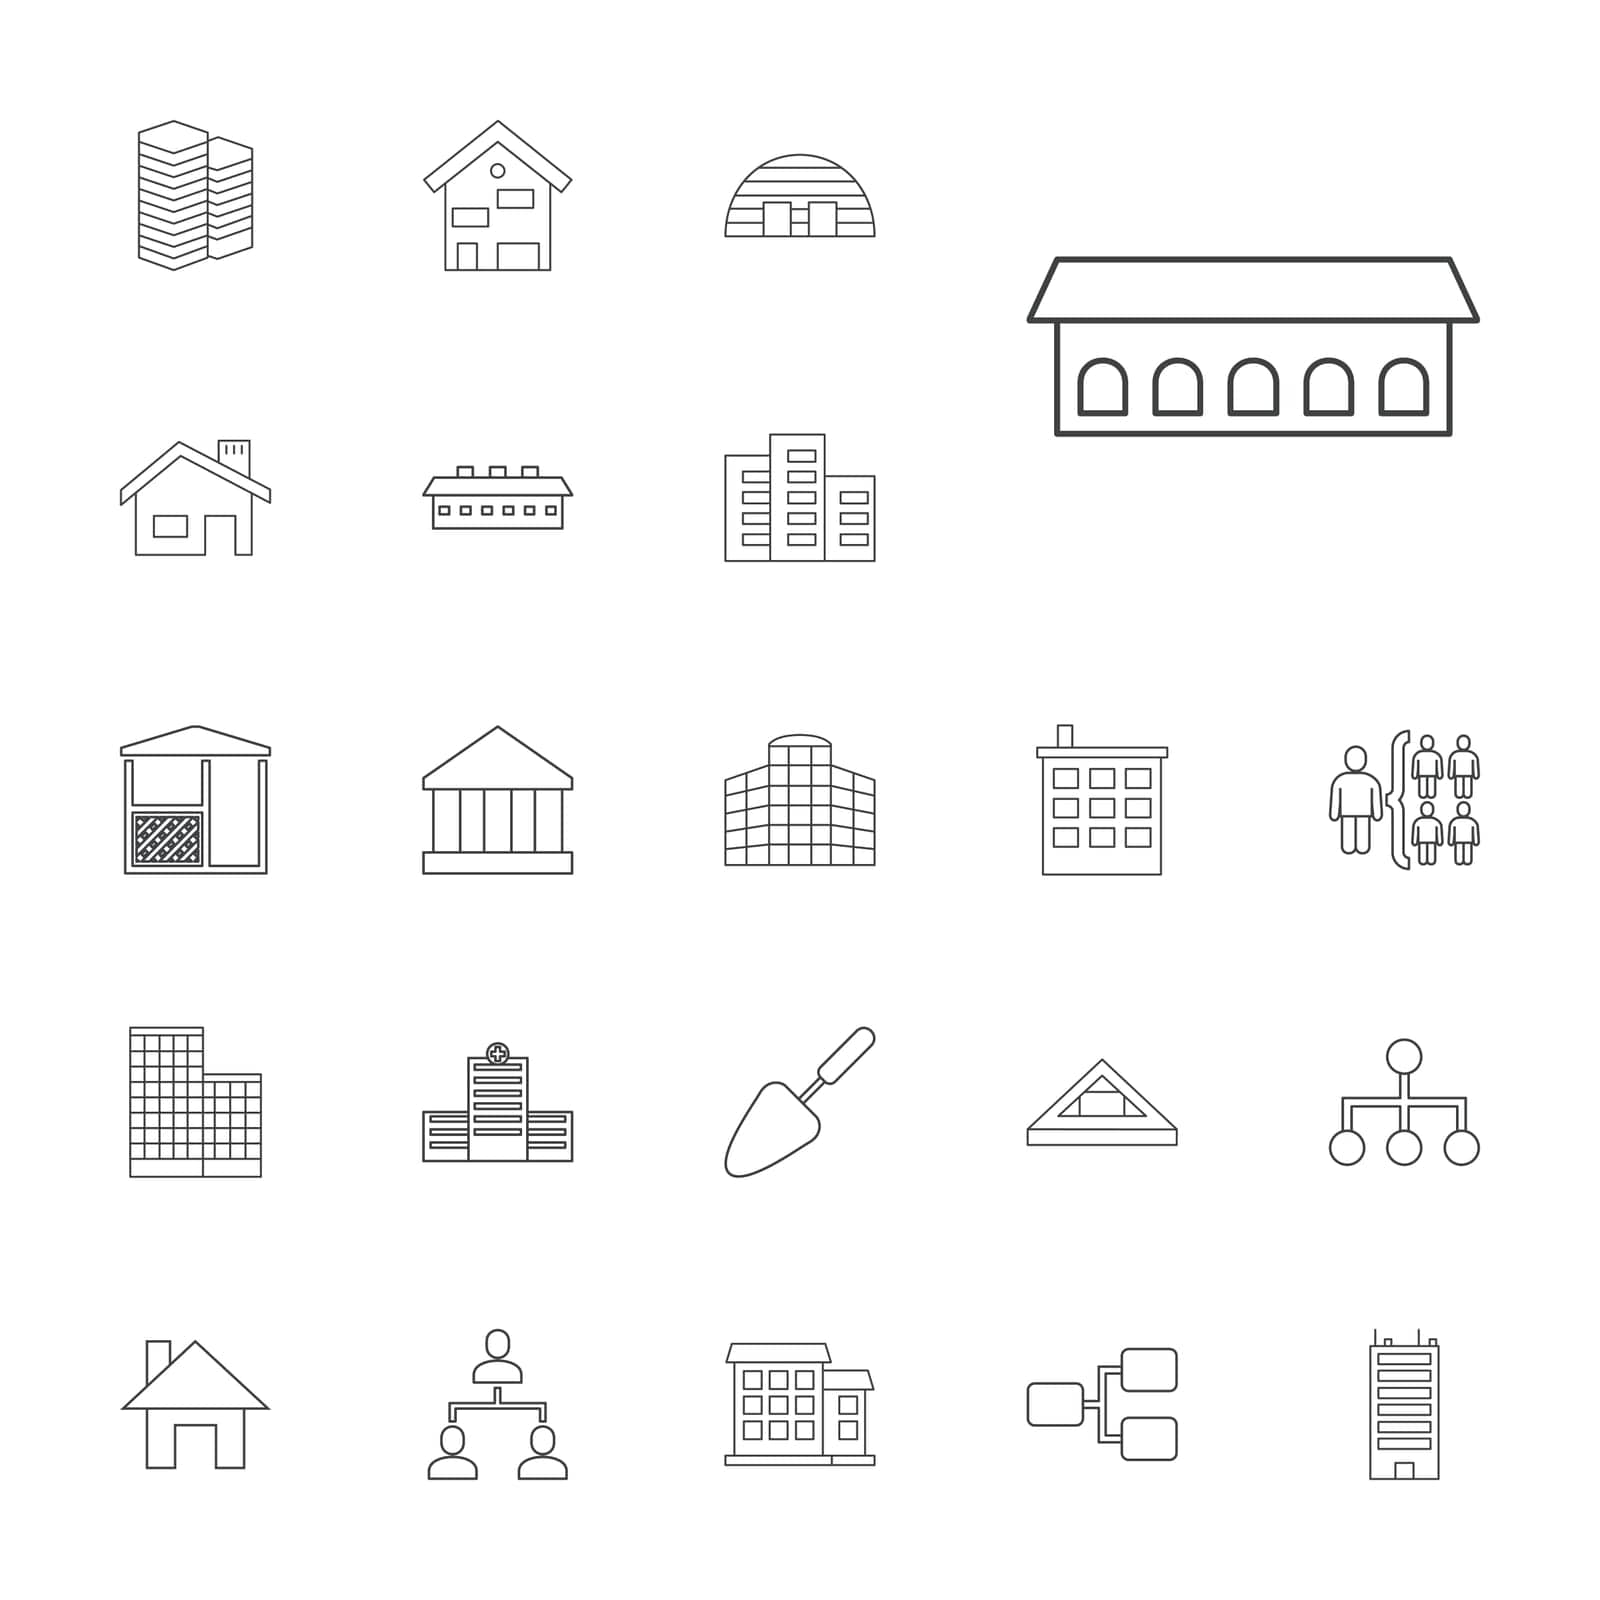 symbol,gazebo,city,concept,icon,sign,isolated,louvre,office,distribution,house,building,retail,bank,government,barn,design,hotel,construction,vector,hospital,tower,element,architecture,trowel,set,business,center,estate,centre,skyscraper,structure,home,headquarters,residential,urban,background,illustration,apartment,object